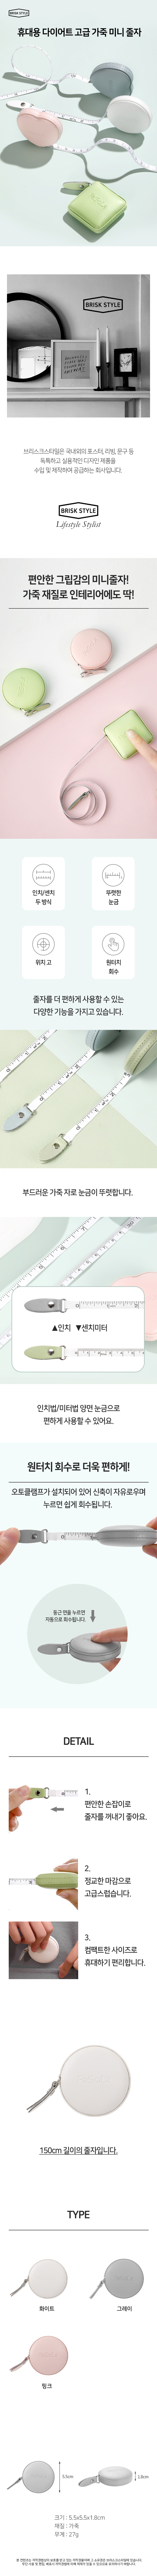 Portable diet high-quality leather mini tape measure.jpg